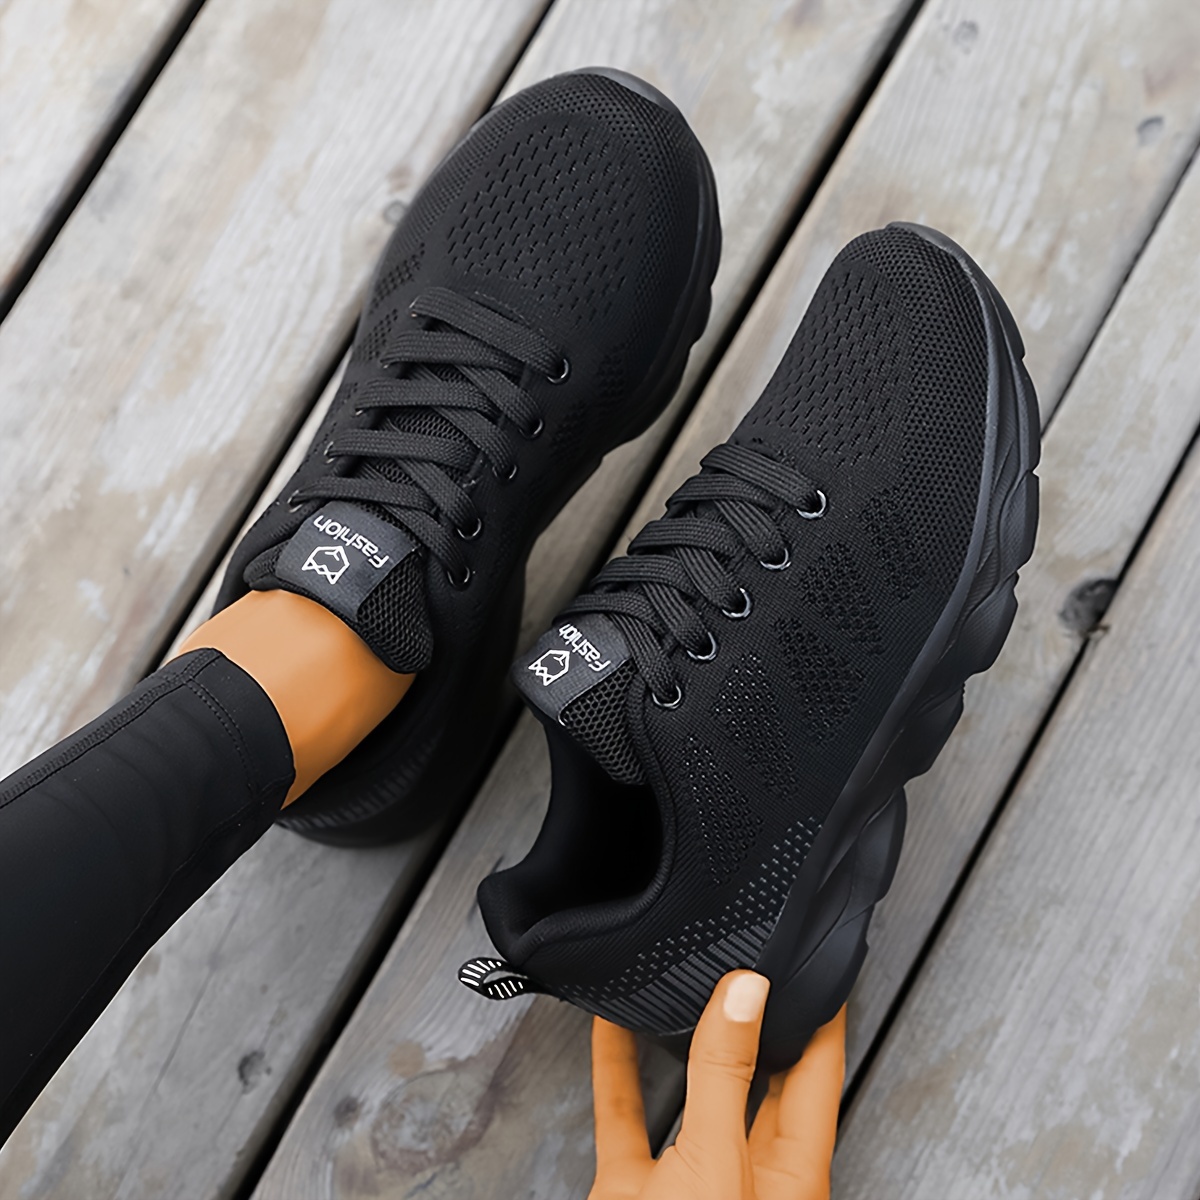 

Women's Contrast Color Casual Sneakers, Lace Up Platform Soft Sole Walking Knitted Shoes, Low-top Breathable Sporty Trainers